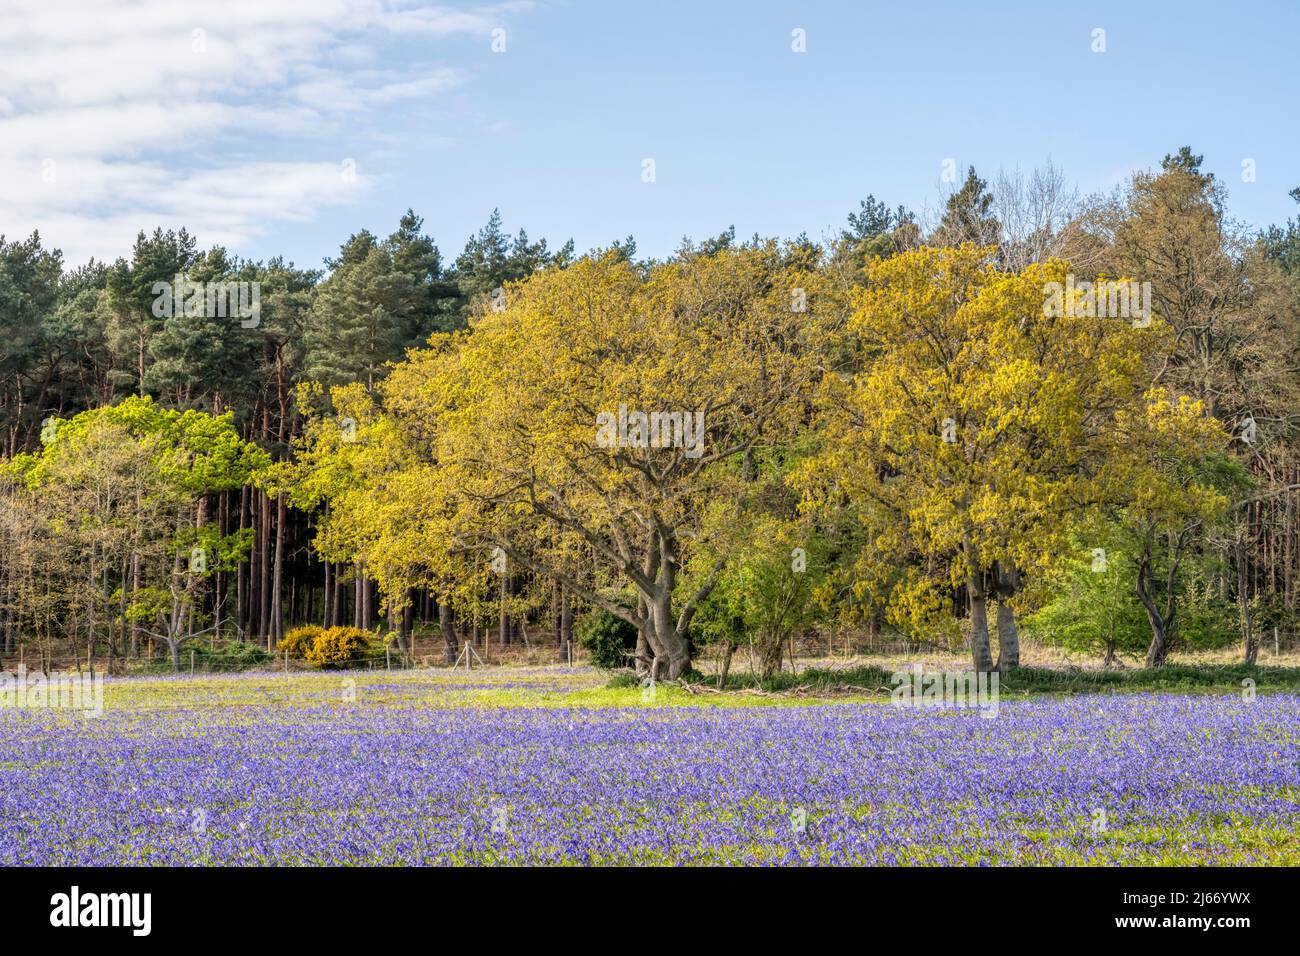 Cultivated English bluebells, Hyacinthoides non-scripta, growing in a Norfolk field. Stock Photo